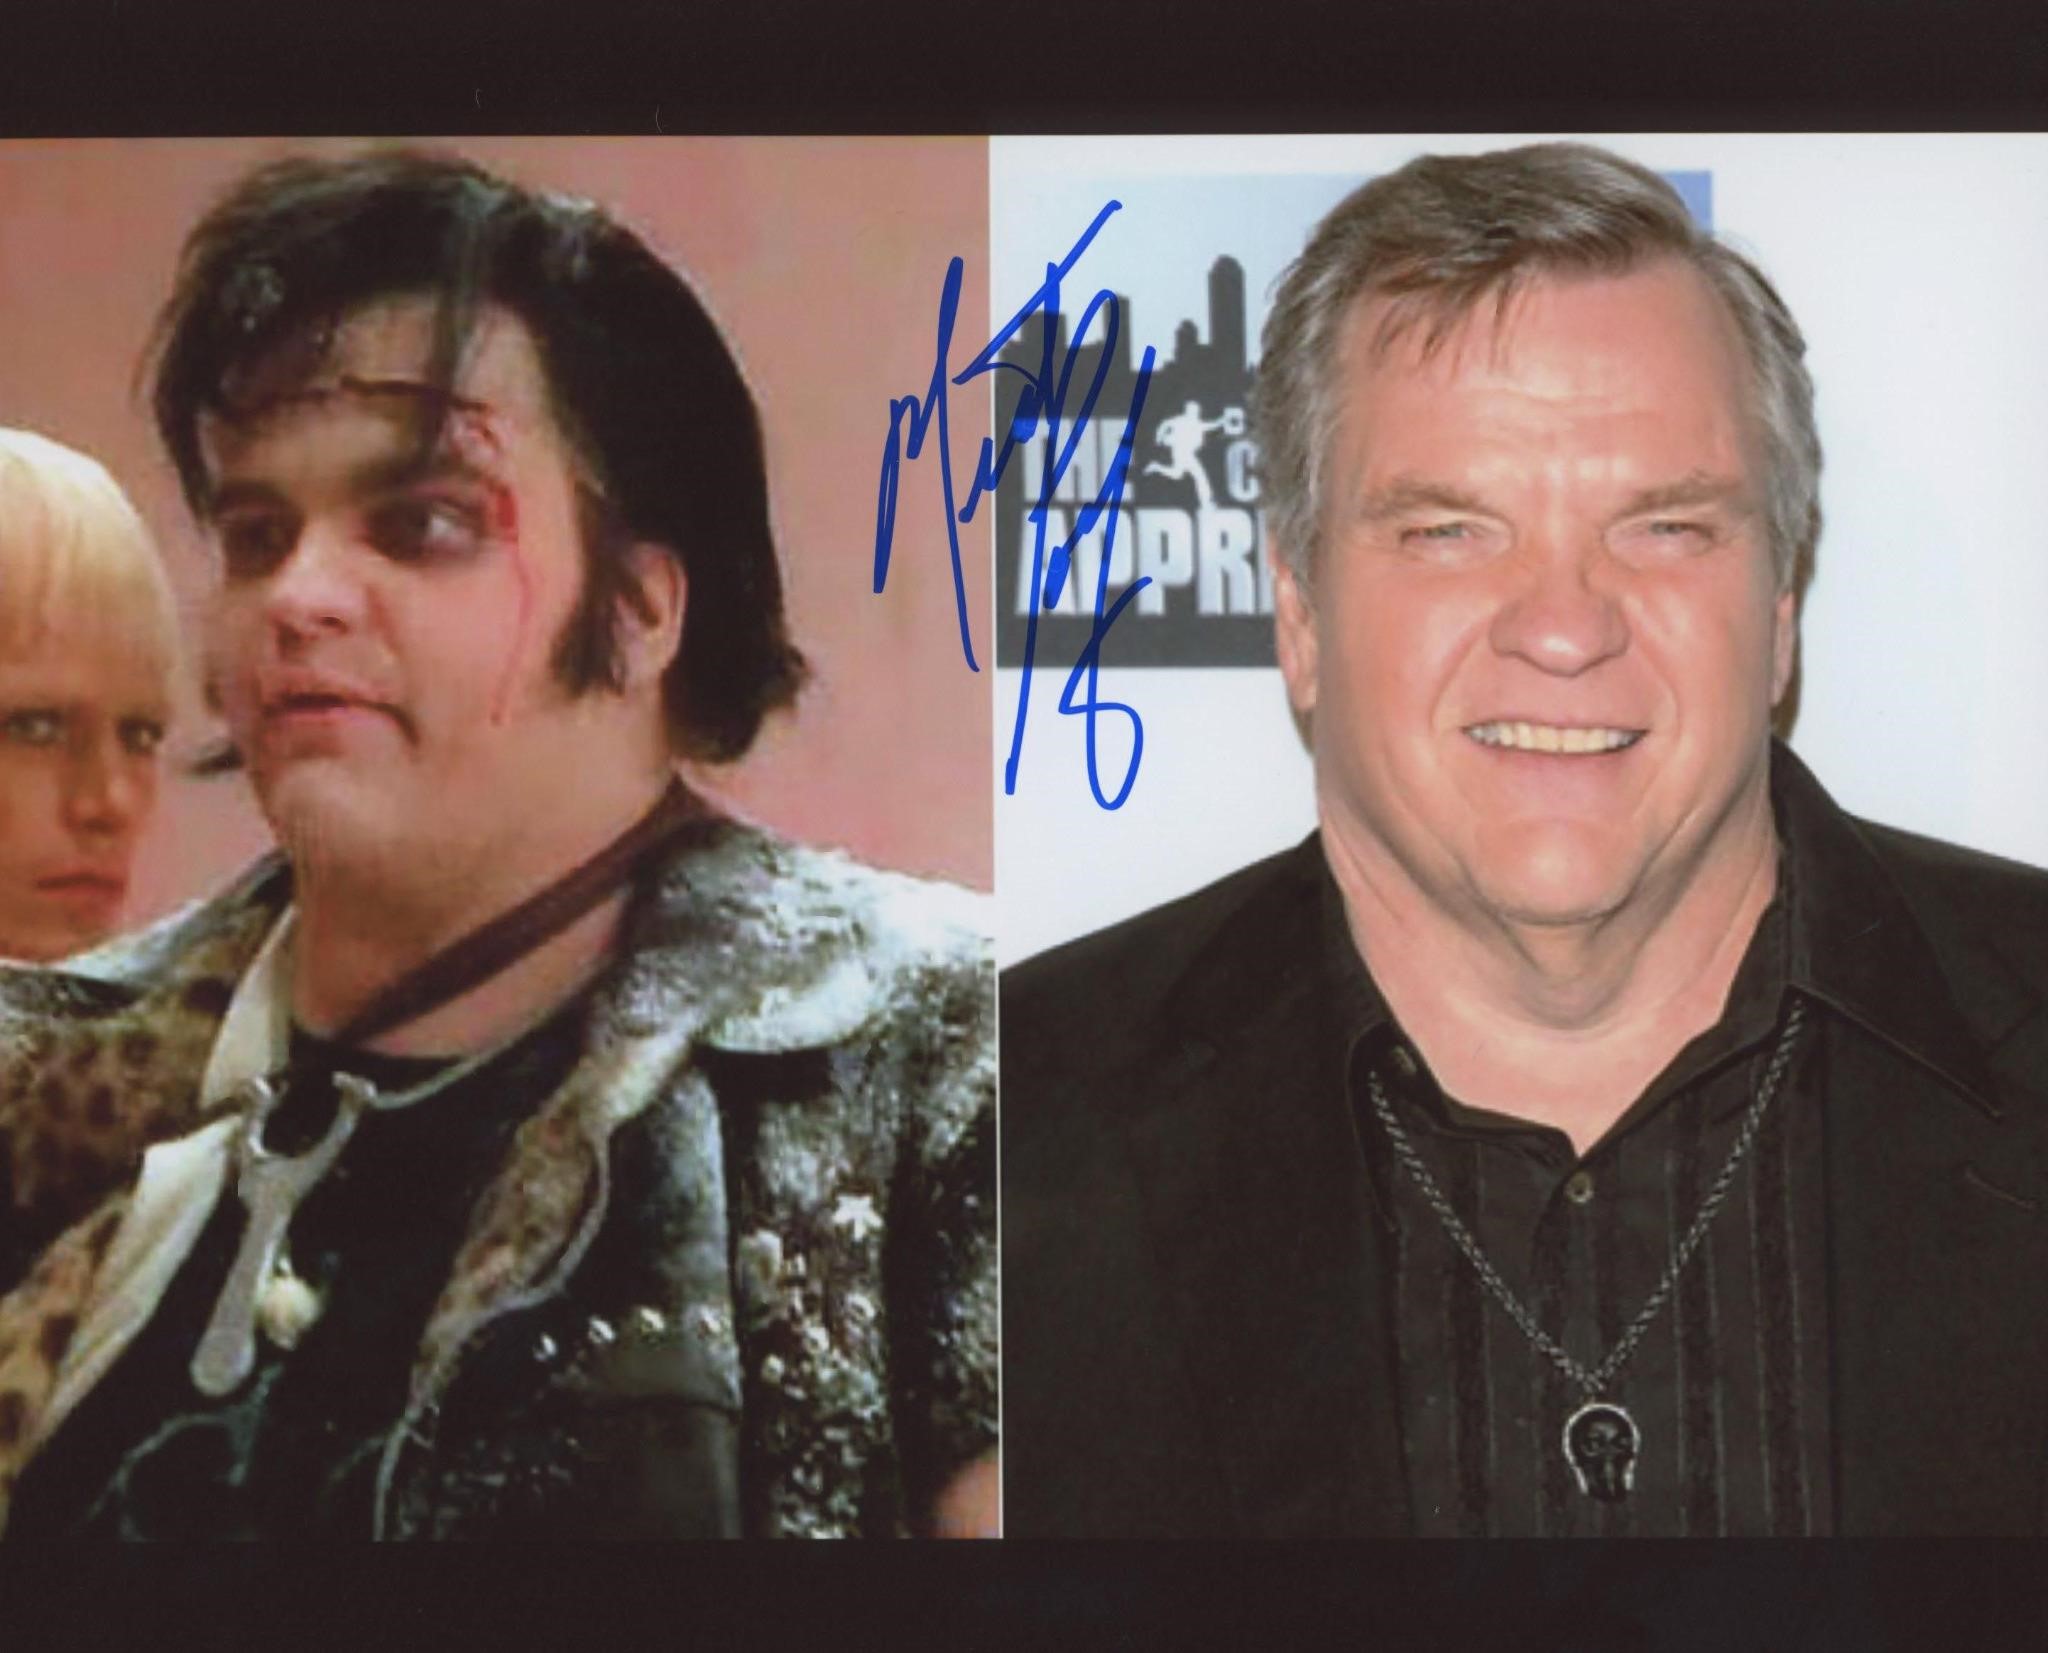 Rocky Horror Show Meatloaf signed photo